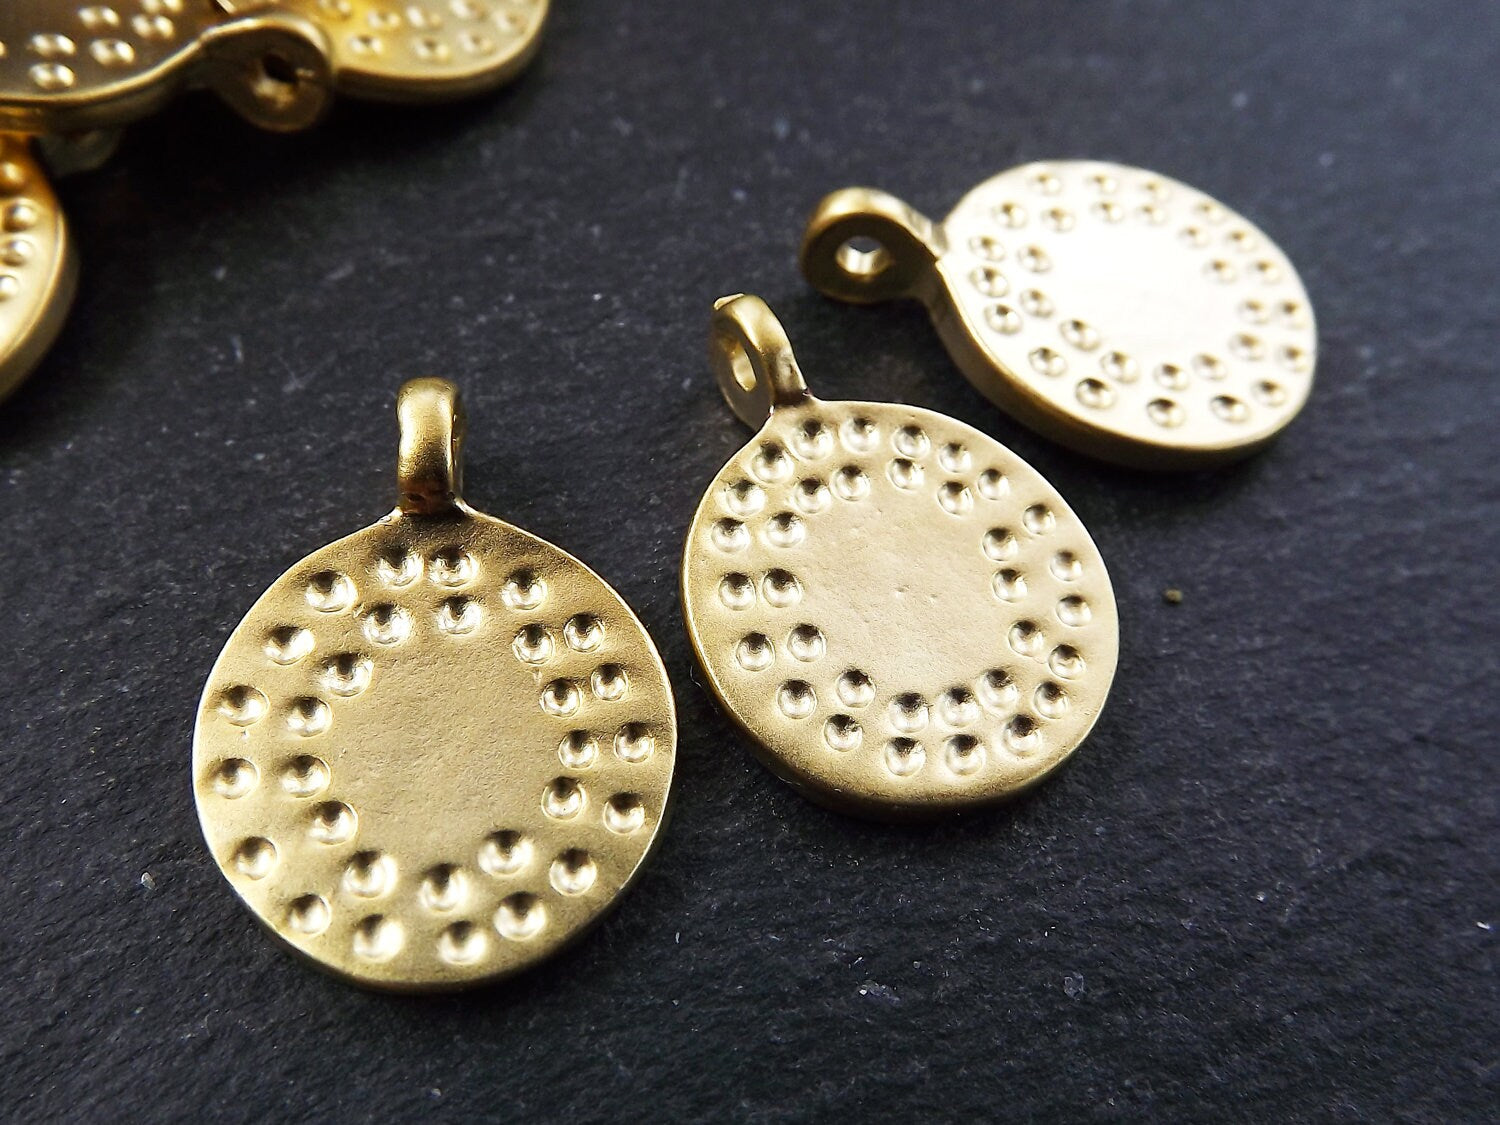 3 Small Dotted Round Gold Disc Pendants with Side Facing Loop Ethnic Pendant Bracelet Charm Zen Yoga Jewelry Supplies 22k Matte Gold Plated